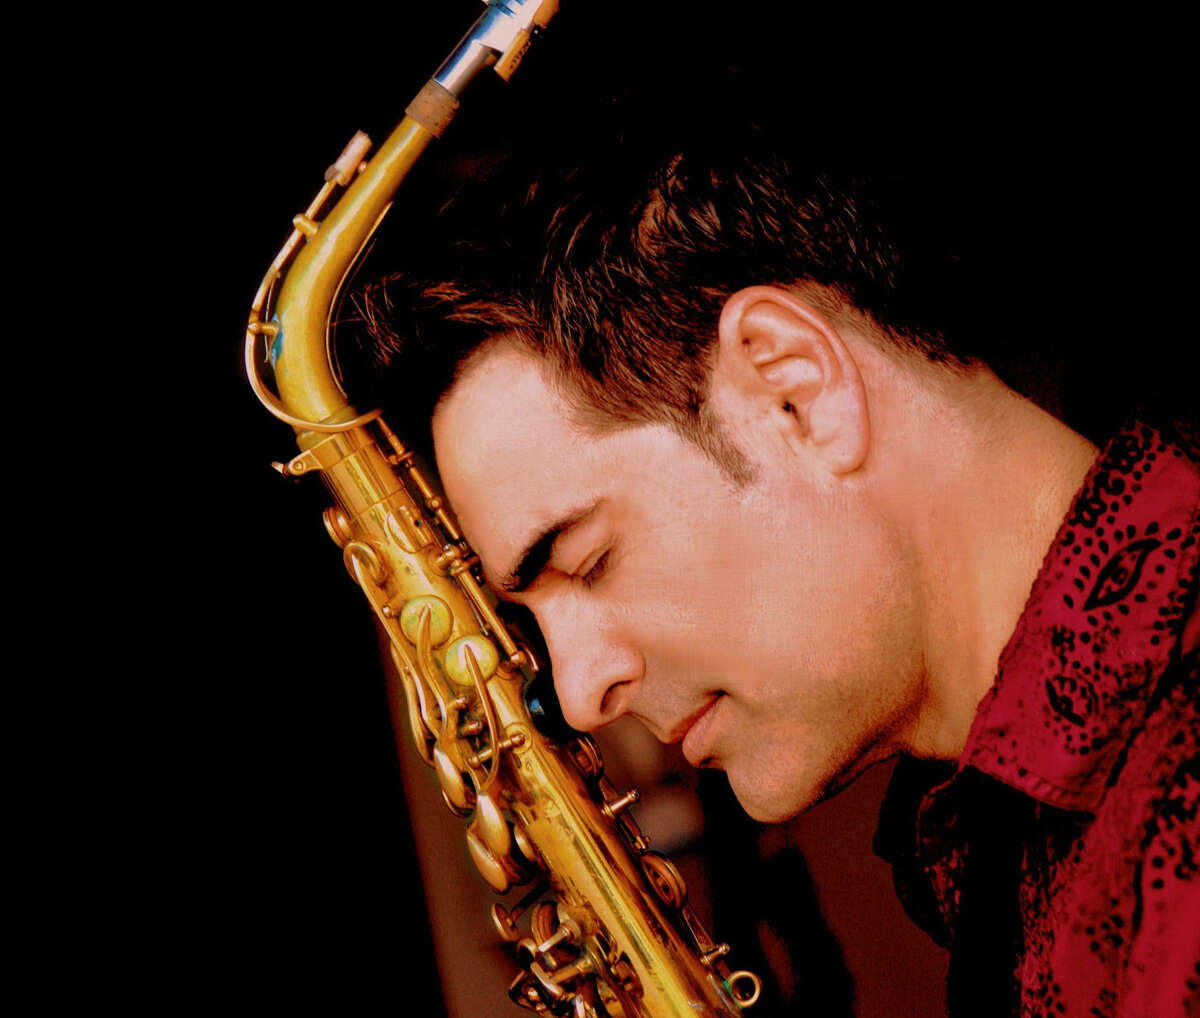 Jazz saxophonist Will Donato is set to appear at Jazz a'Round Old Town Helotes May 17.